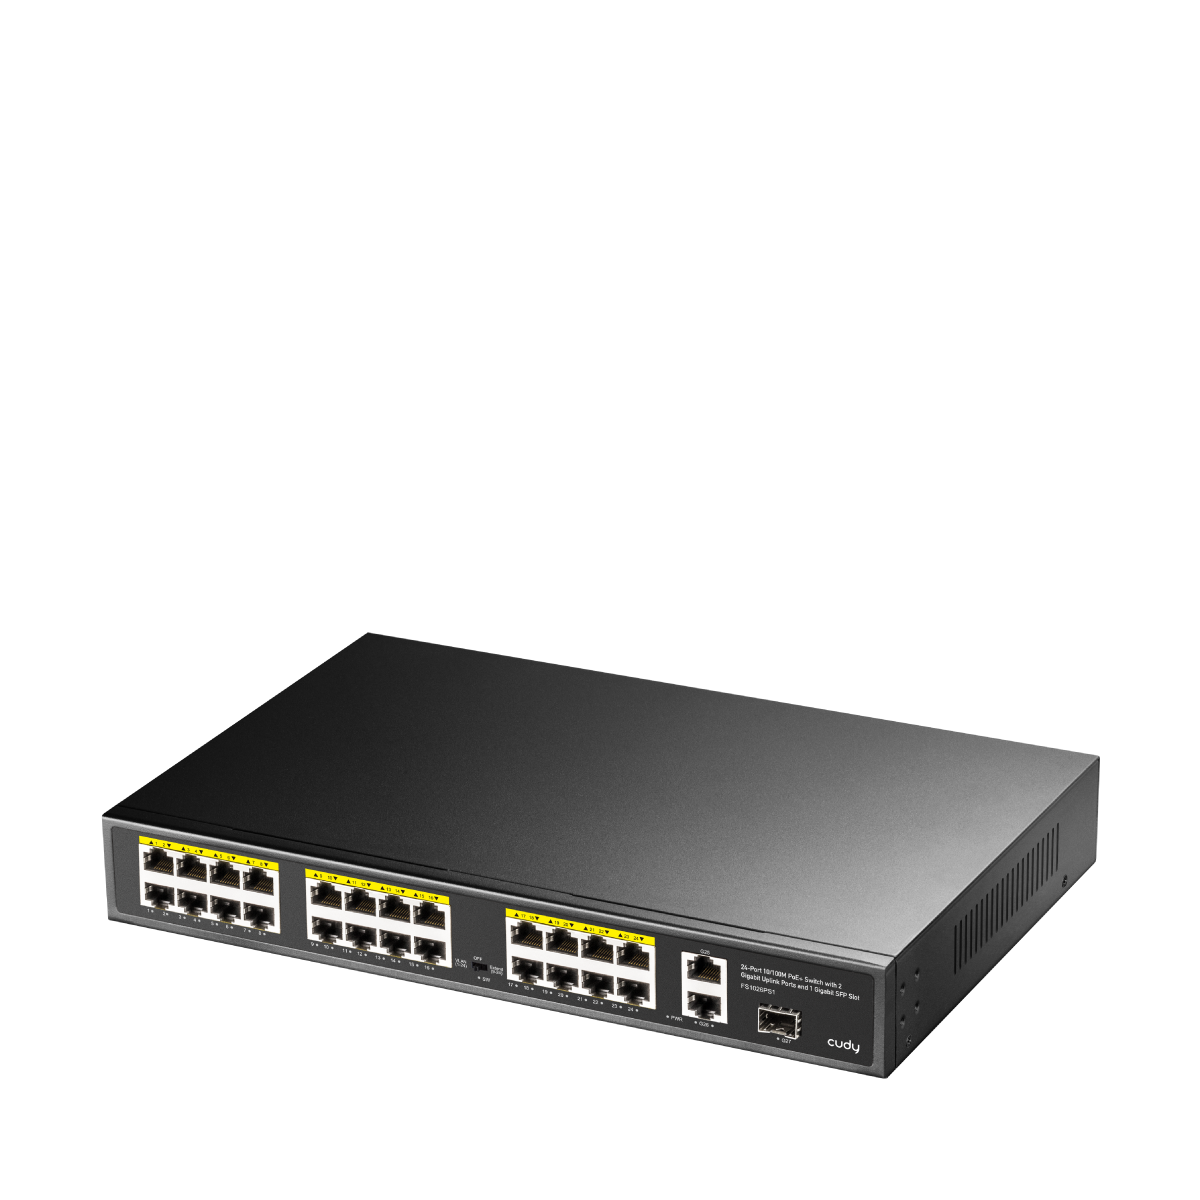 24-FE PoE Switch with 2 Uplink GbE and 1 Uplink SFP, FS1026PS1 2.0